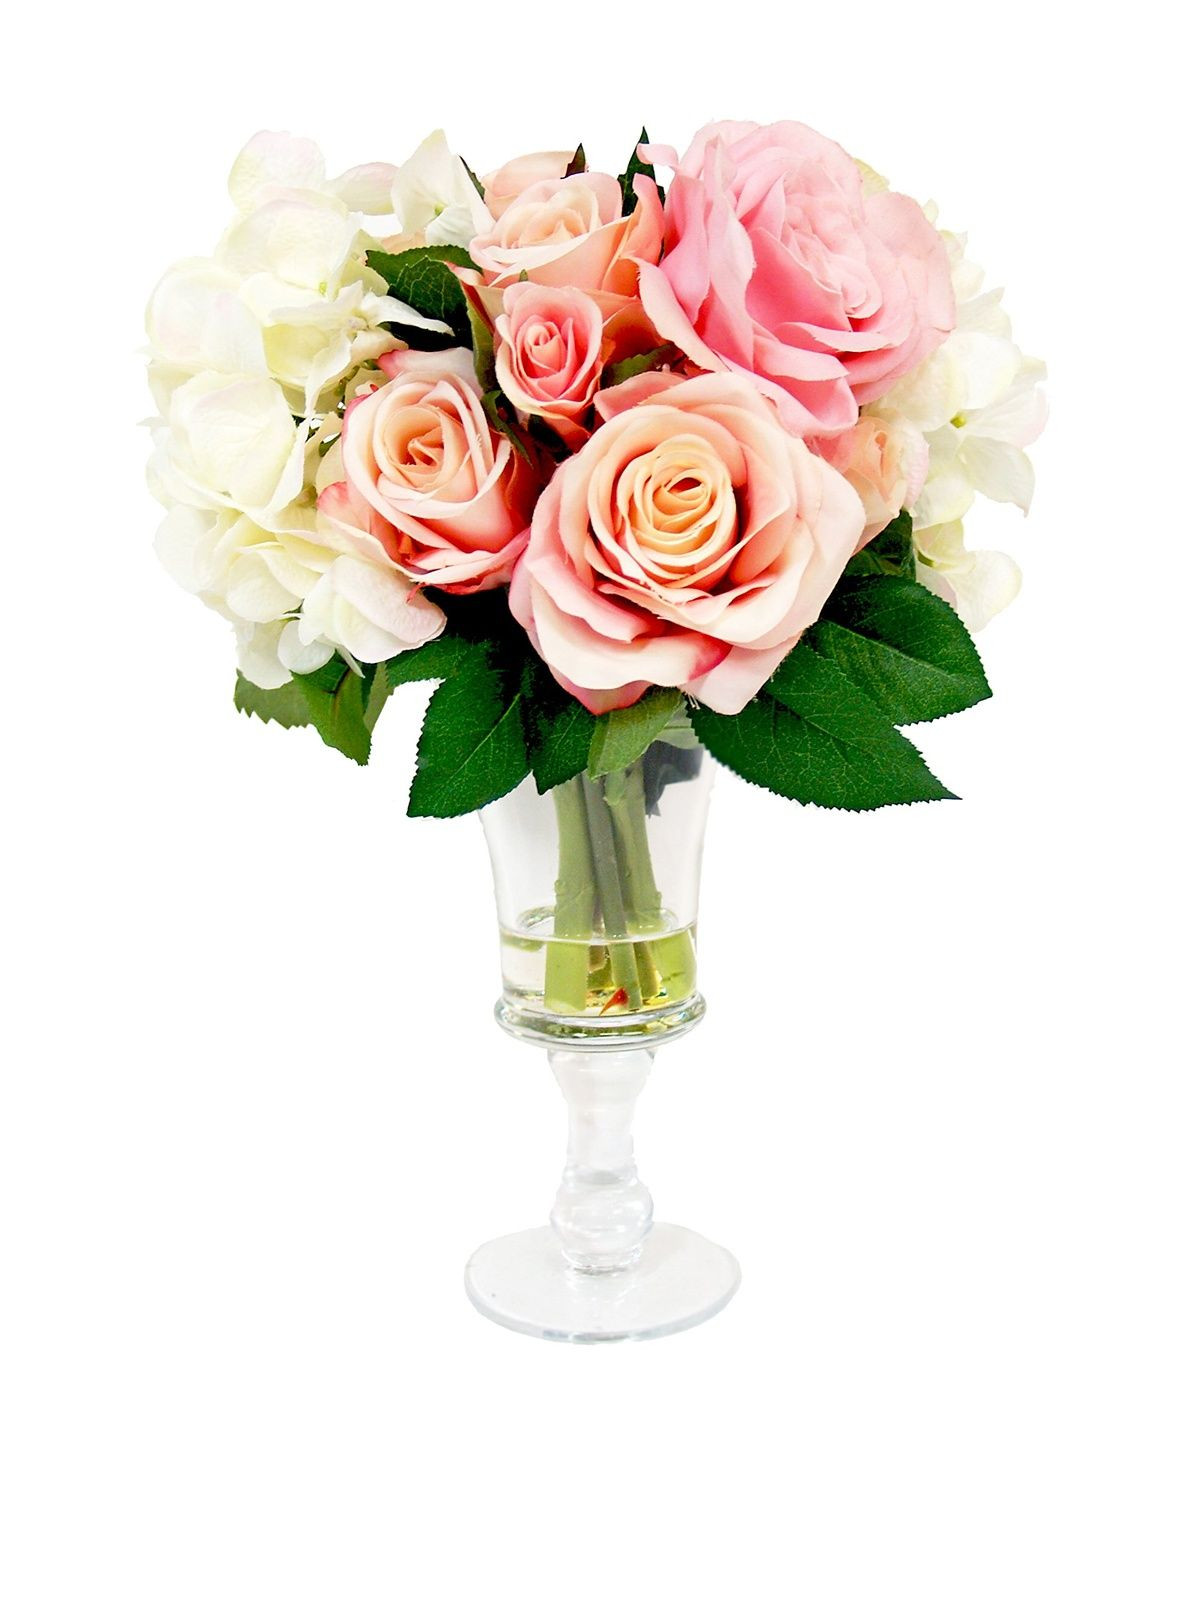 29 Unique Flower Arrangements for Tall Narrow Vases 2024 free download flower arrangements for tall narrow vases of creative displays roses with hydrangeas bouquet pink white green at throughout creative displays roses with hydrangeas bouquet pink white green a